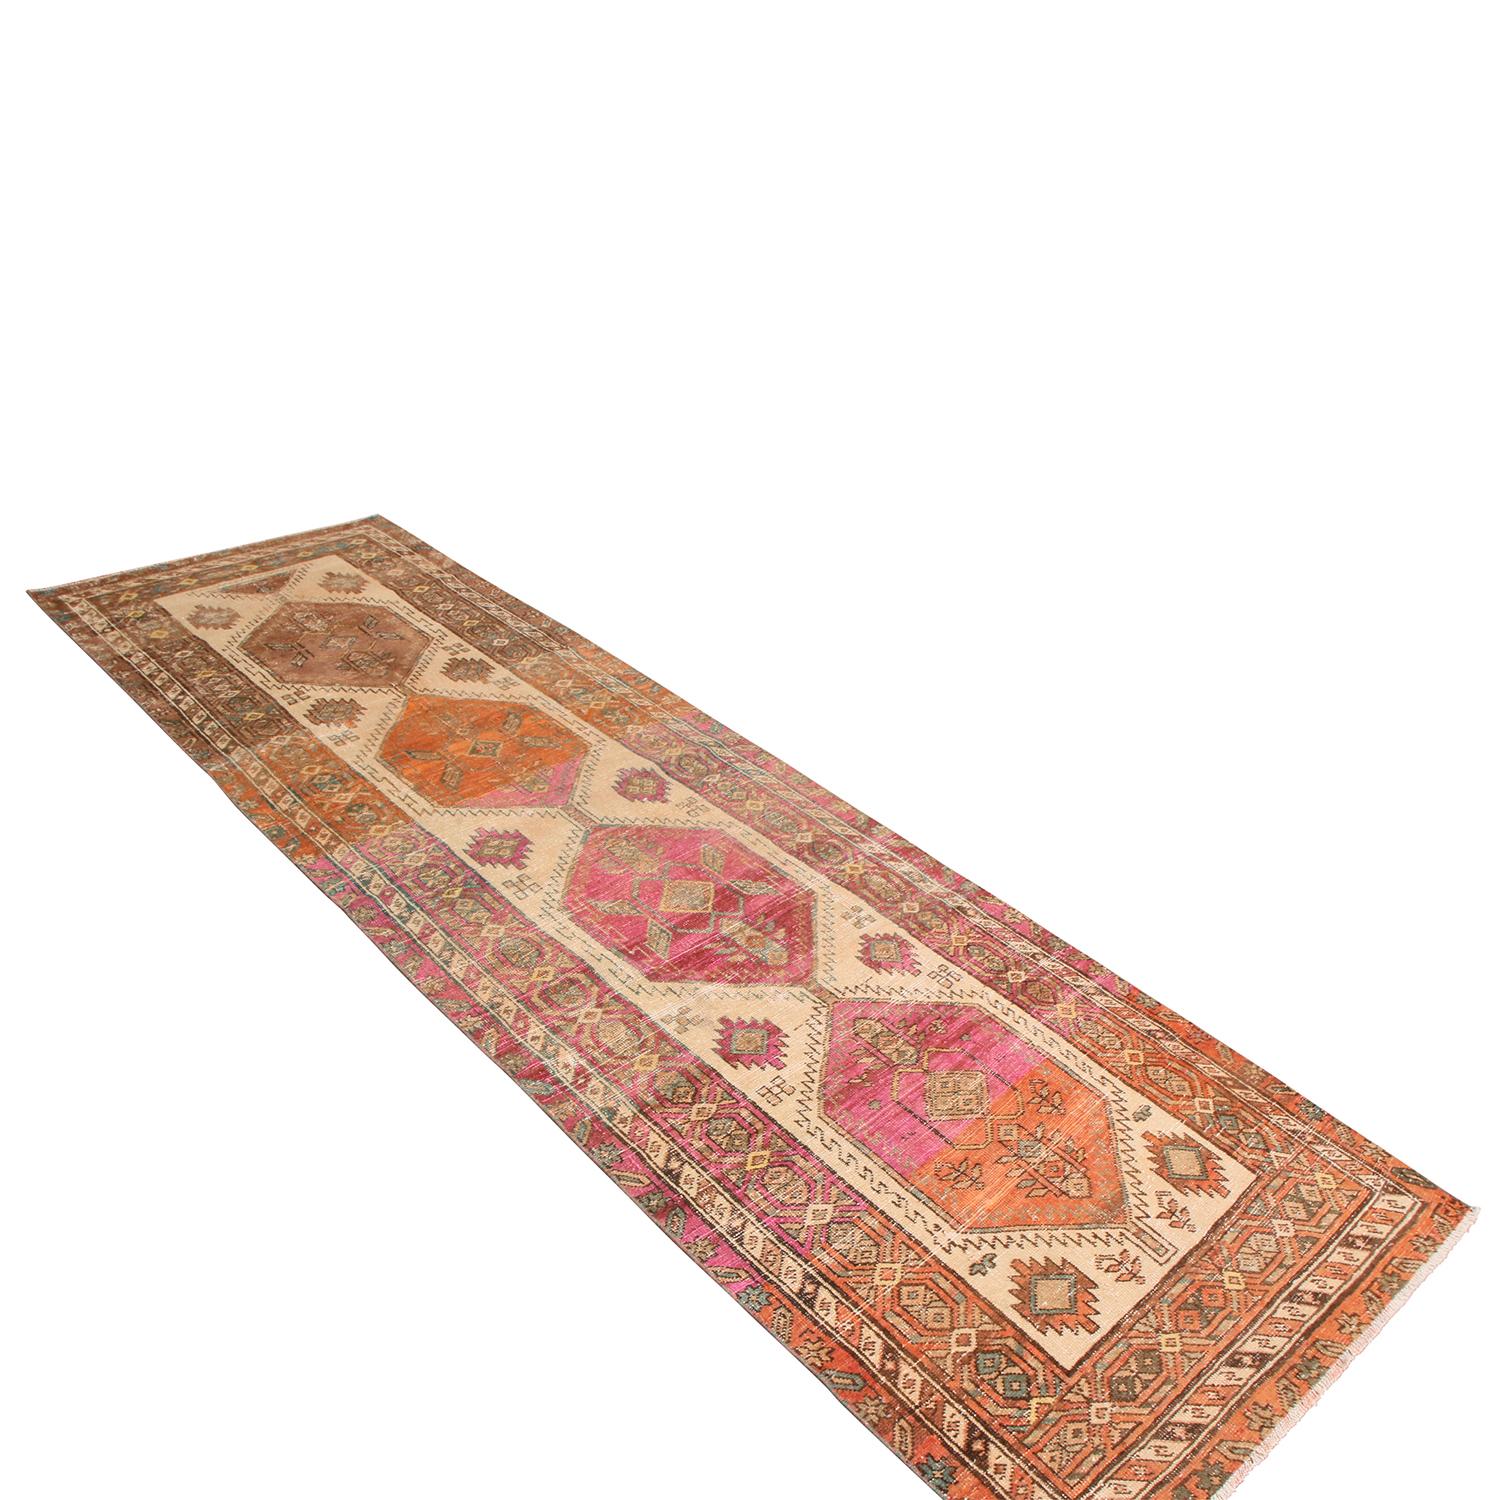 Originating from Pakistan in the 1950s, this vintage hand knotted wool Kazak runner enjoys one of the most distinguished and appealing marriages of rich and bright colorways, pairing autumnal and agricultural hues of beige-brown and tangerine red